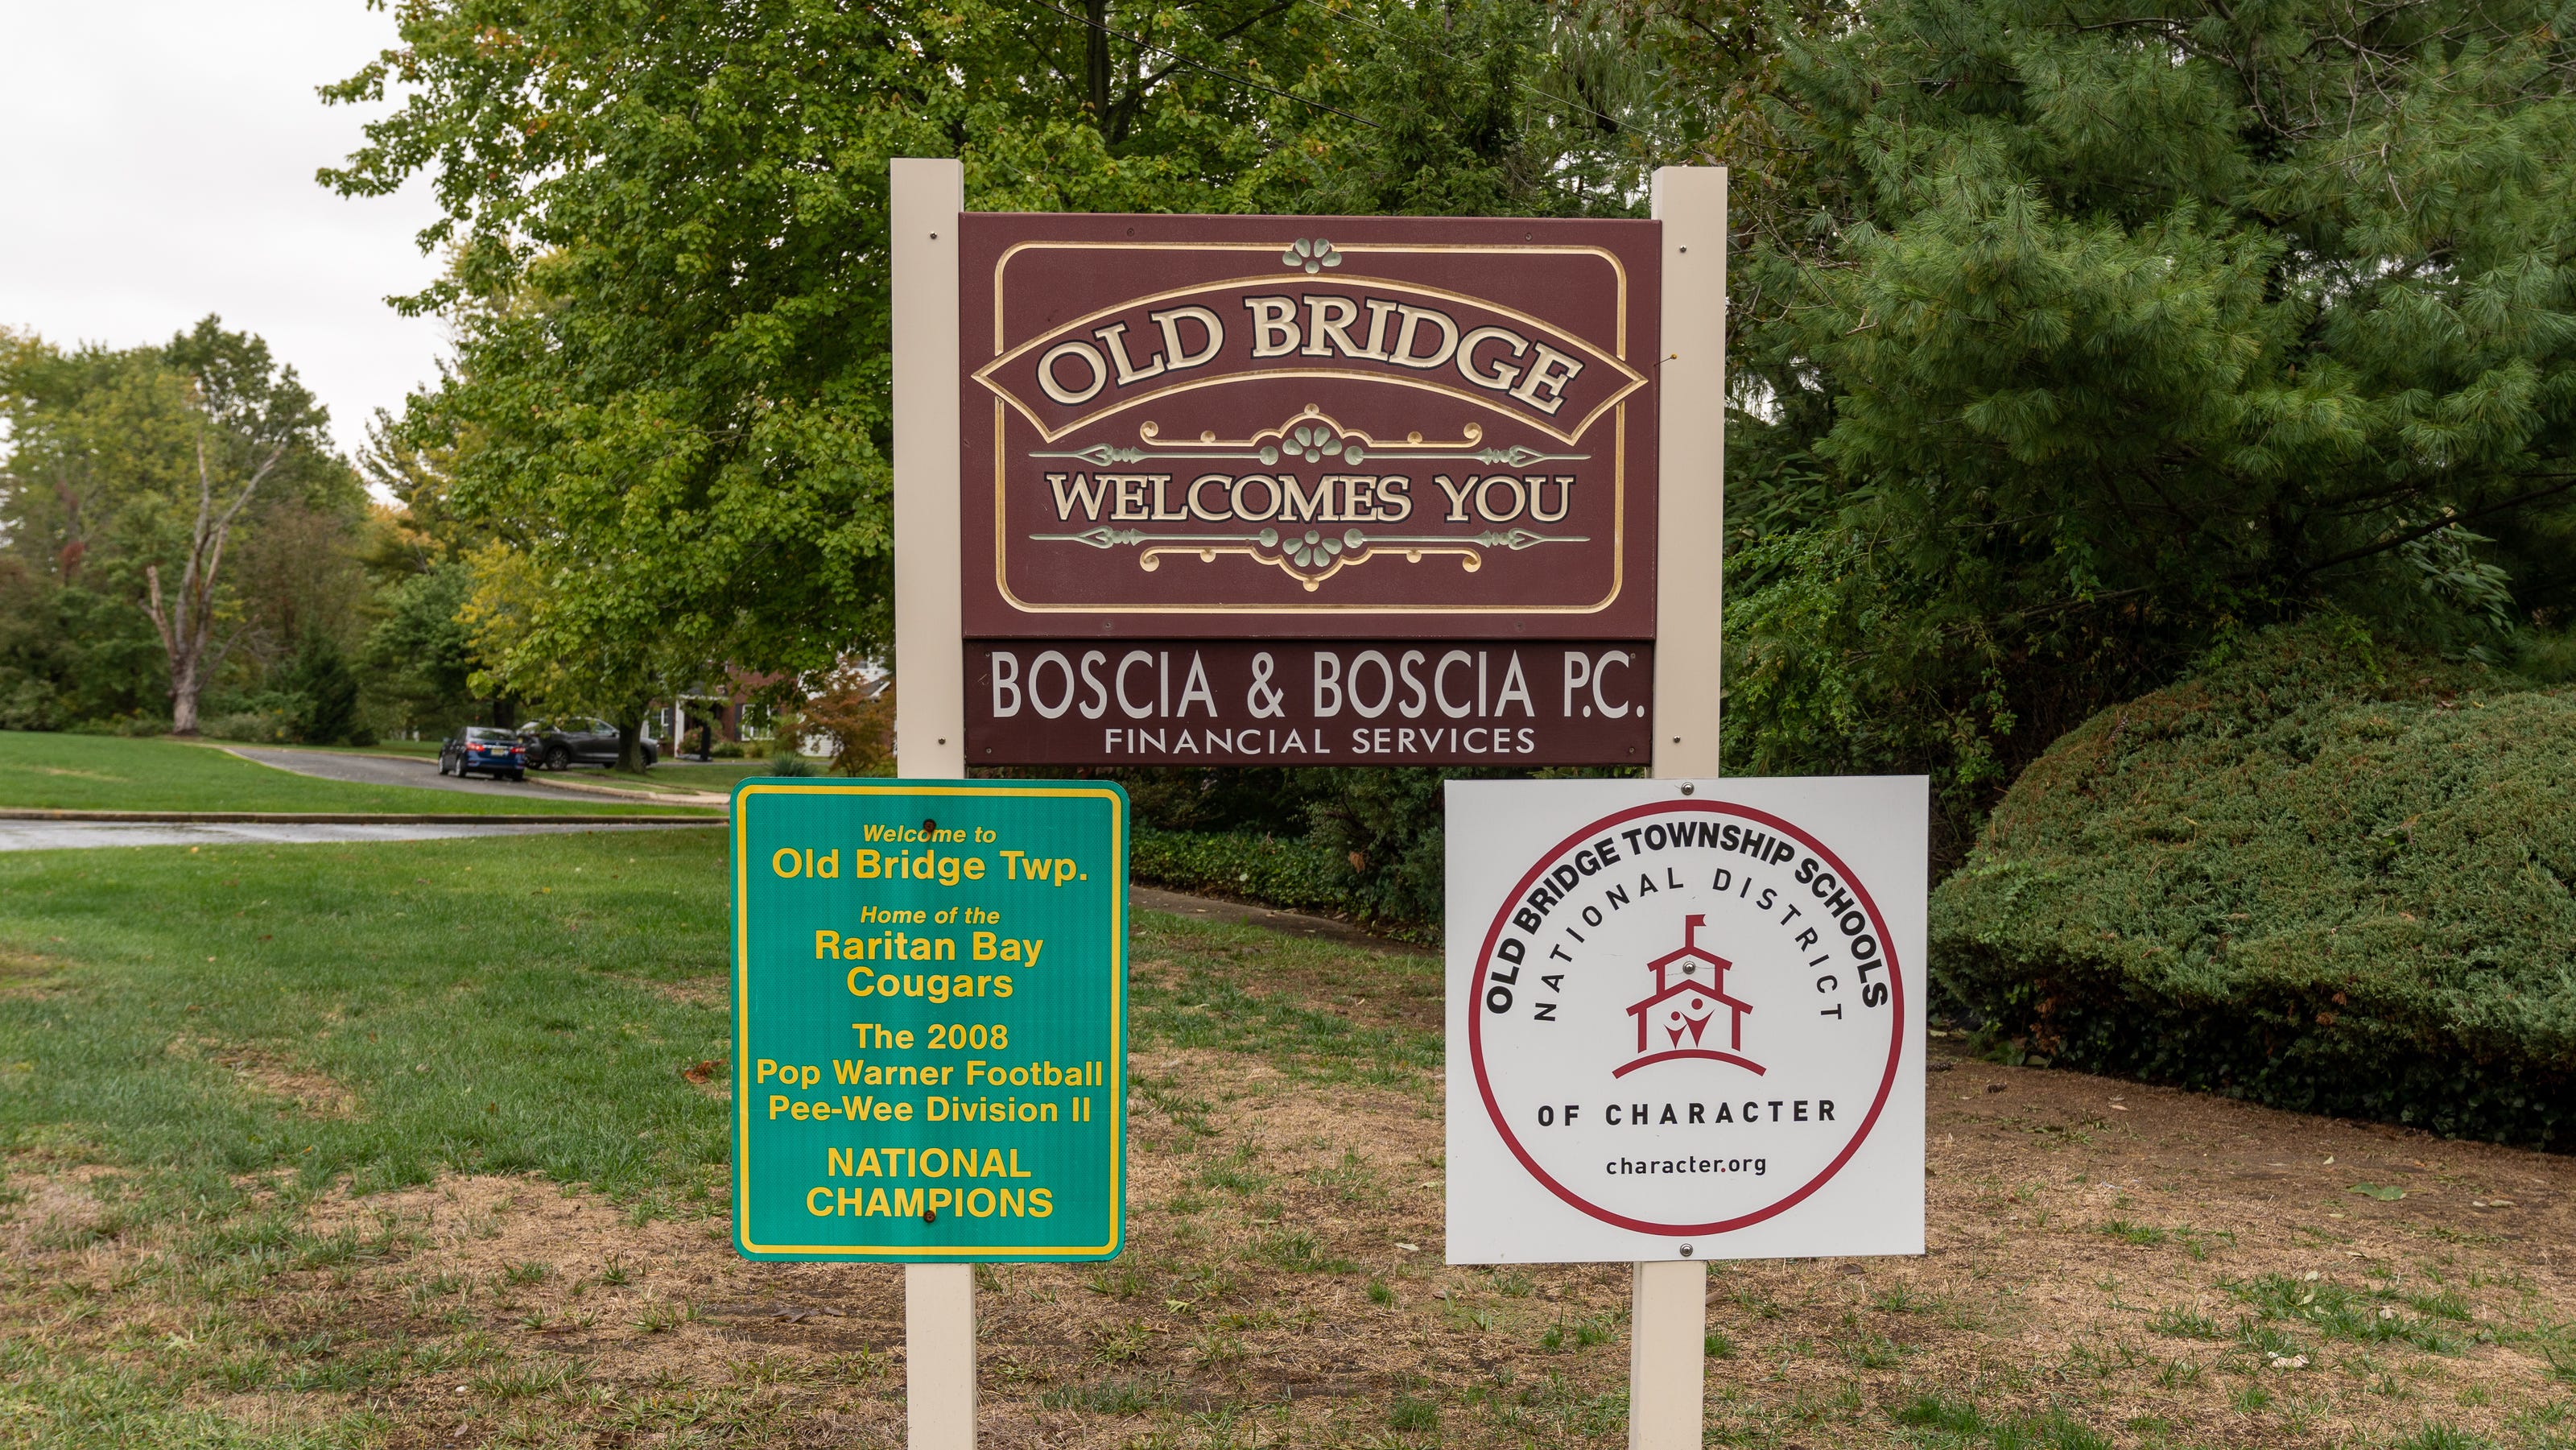 Old Bridge affordable housing project going before planners